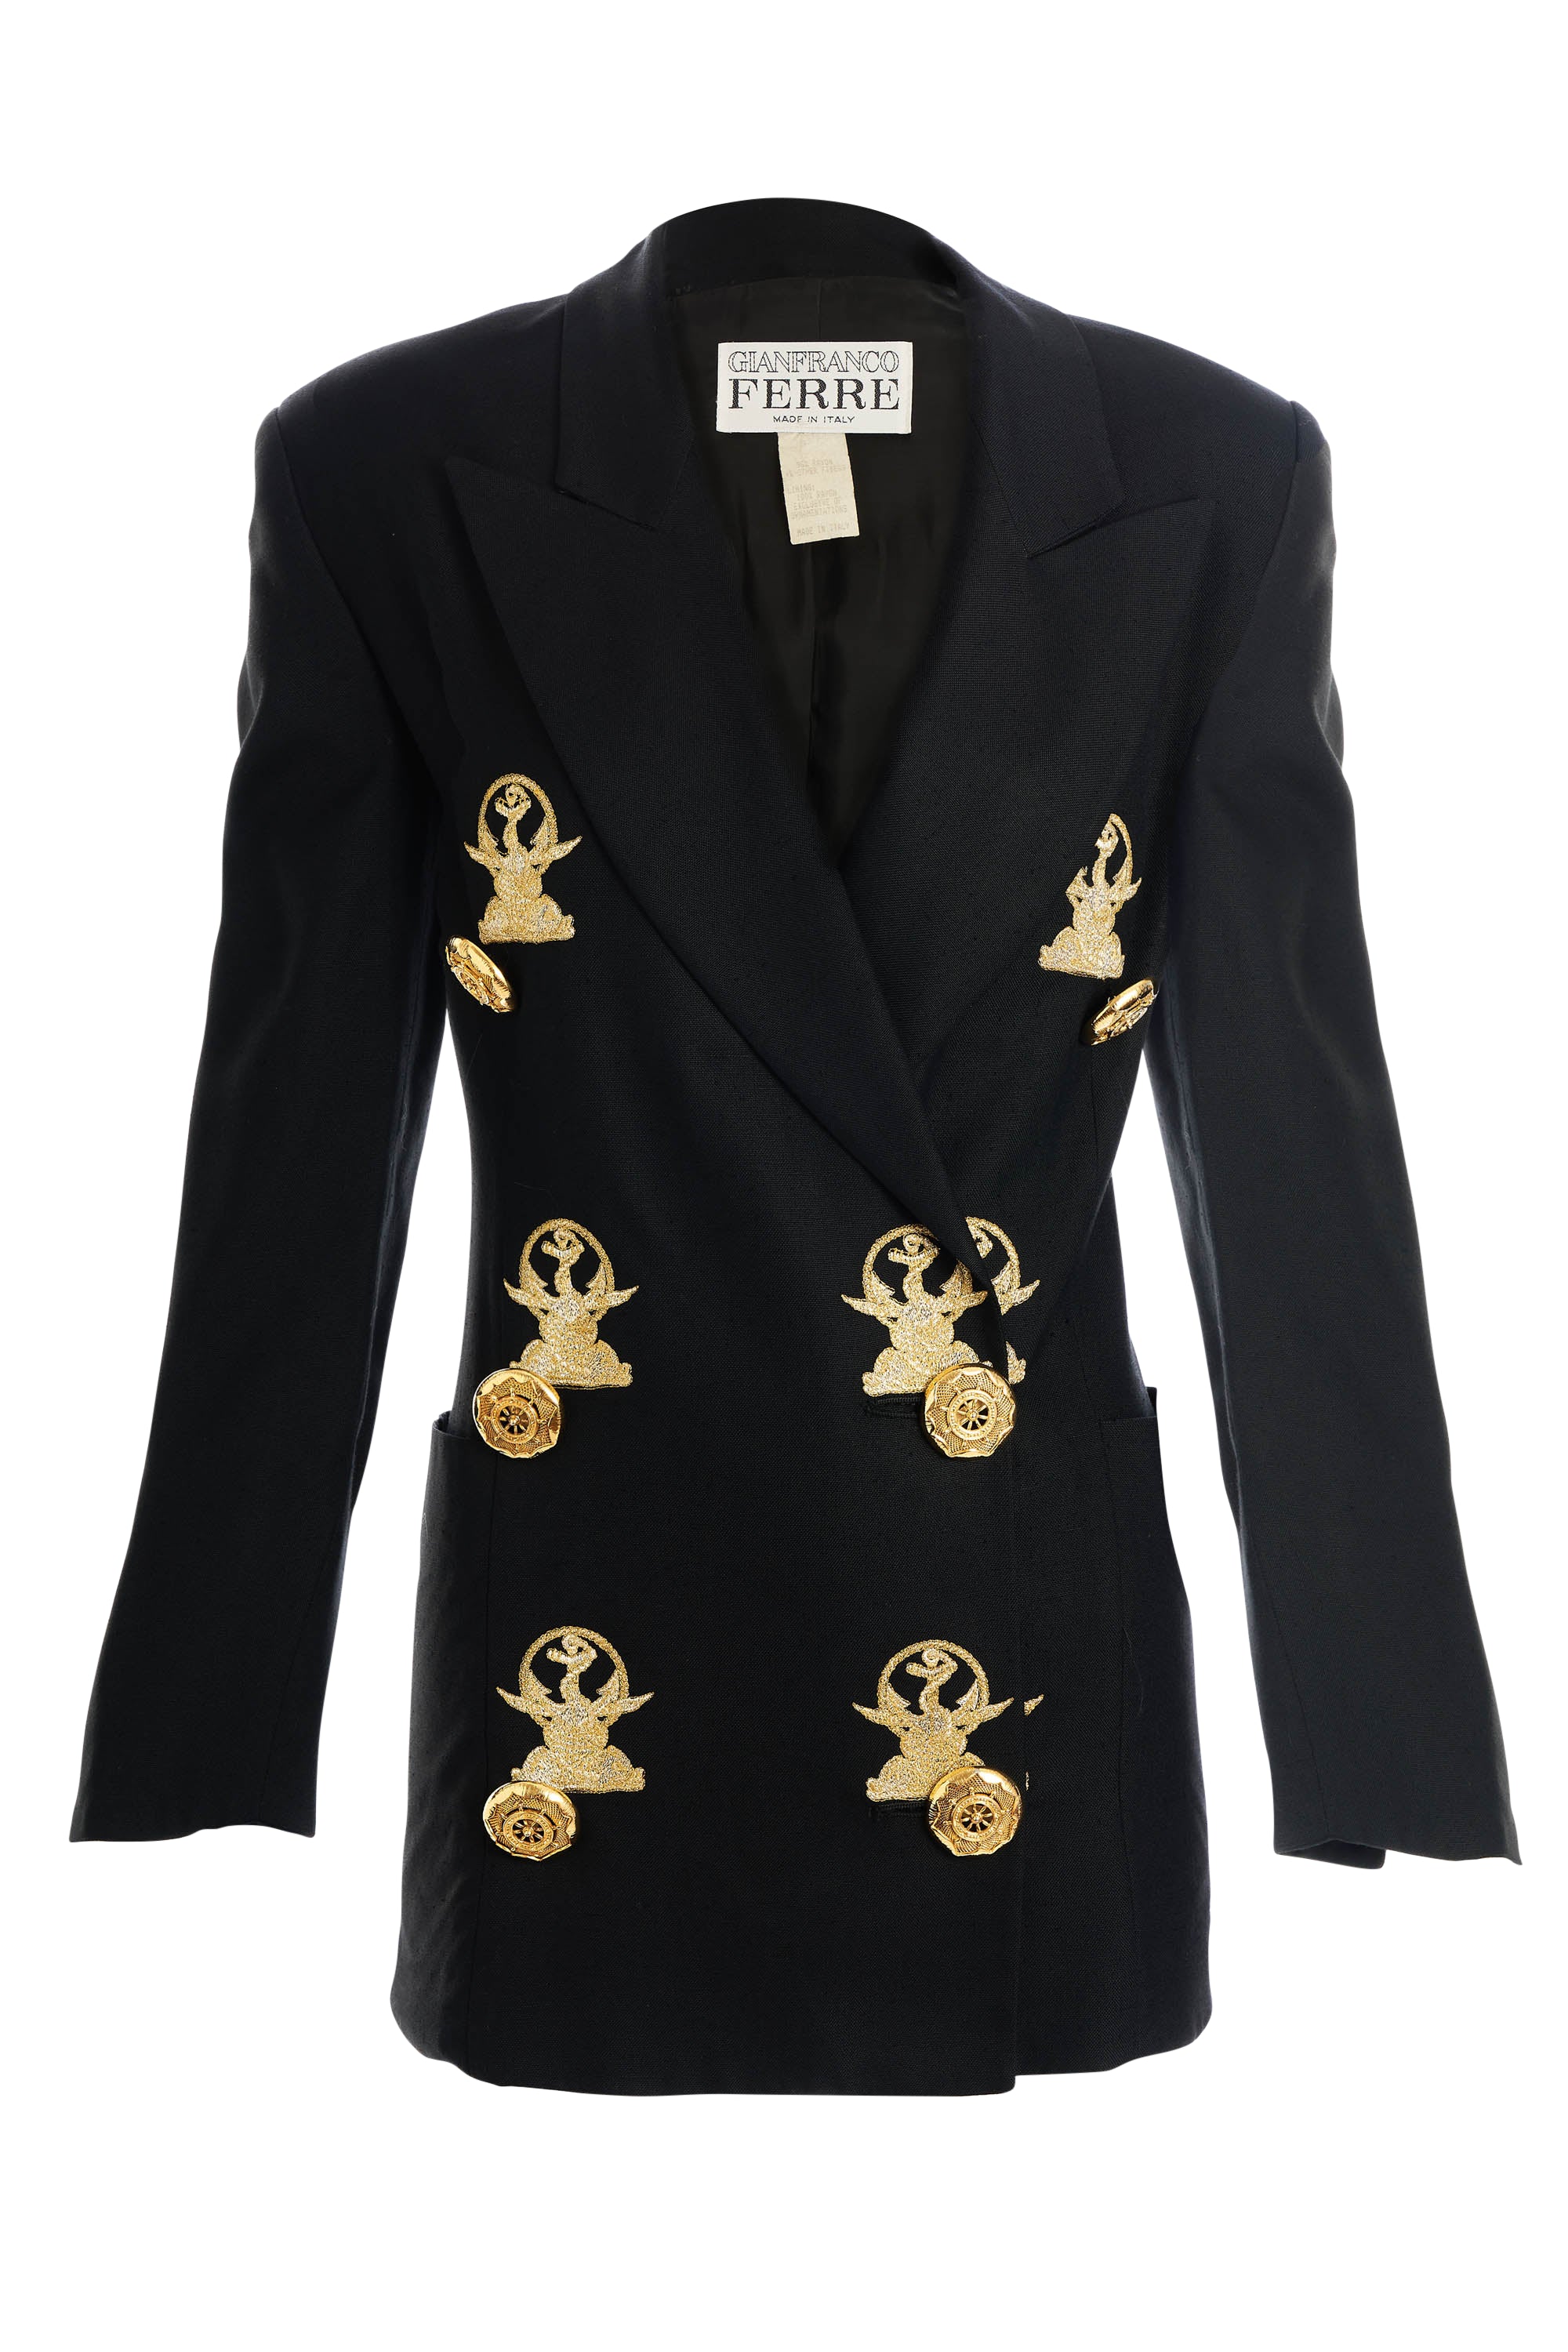 Gianfranco Ferre Black Jacket Gold Embroidery and Nautical Buttons Size 38